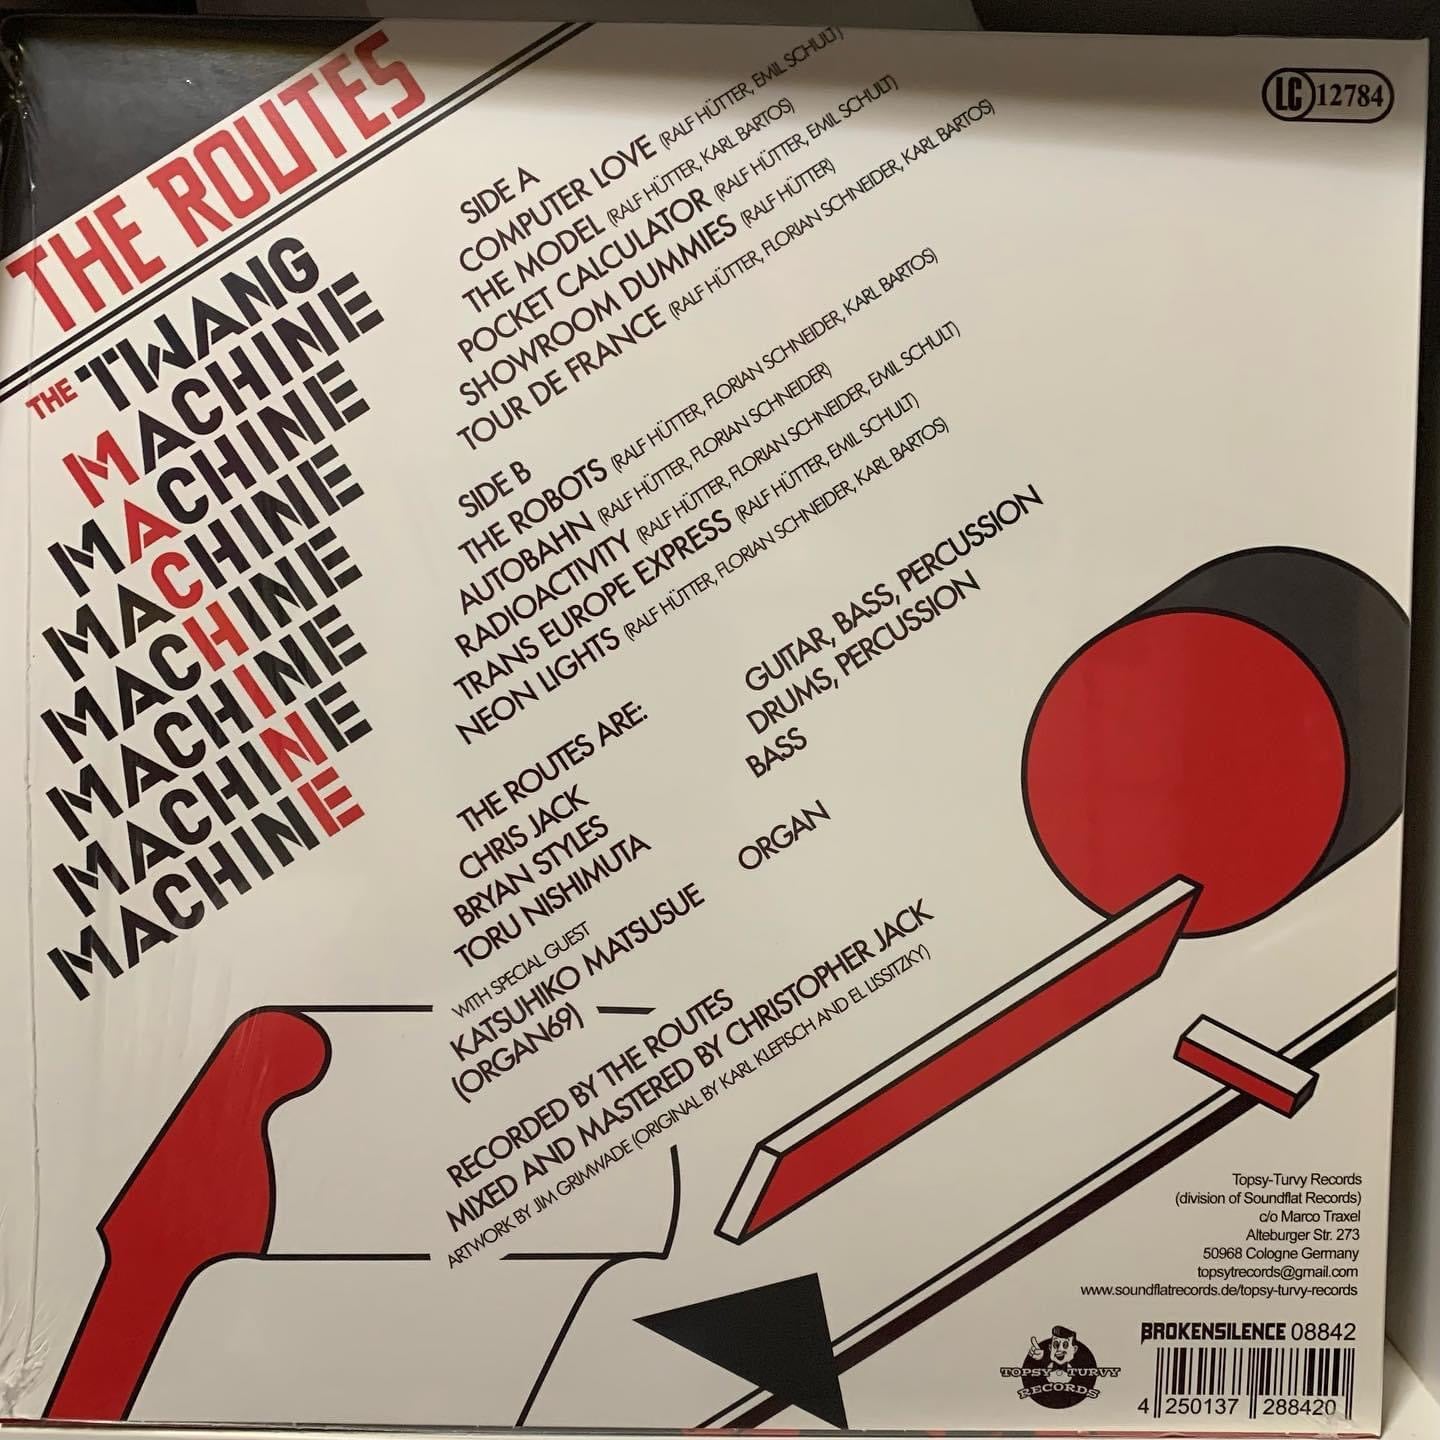 OMRDST-035 The Routes “The Twang Machine” VINYL LP (Import) FIRST PRESSING!